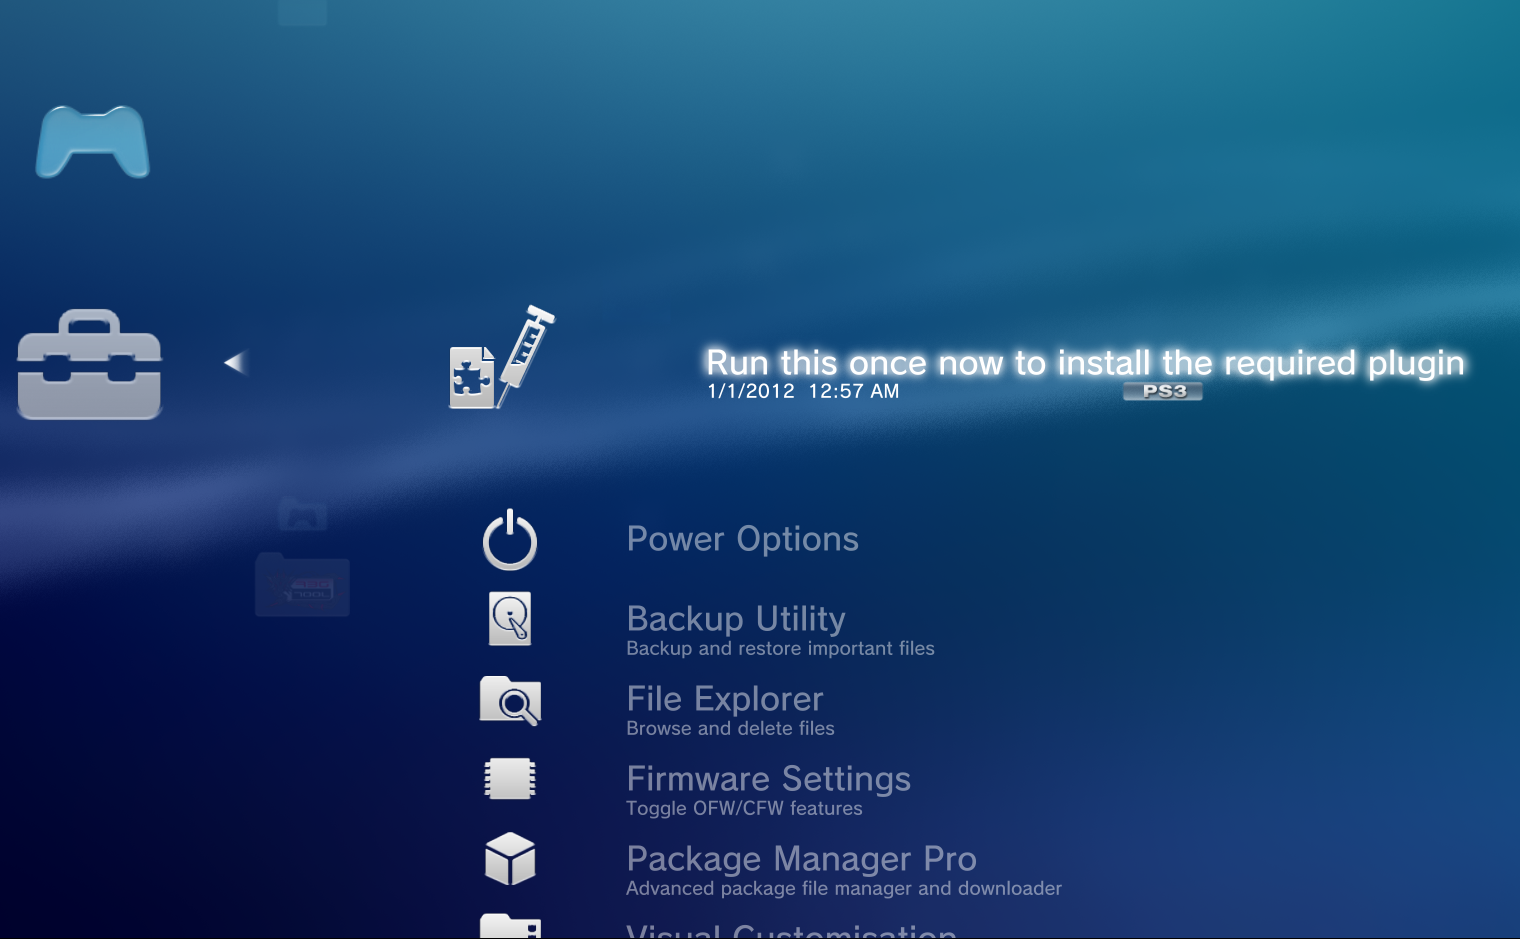 Manager ps3. Файловый менеджер ps3. Бэкап-менеджер ps3. Ultimate Toolbox ps3. Папка package Manager ps3.